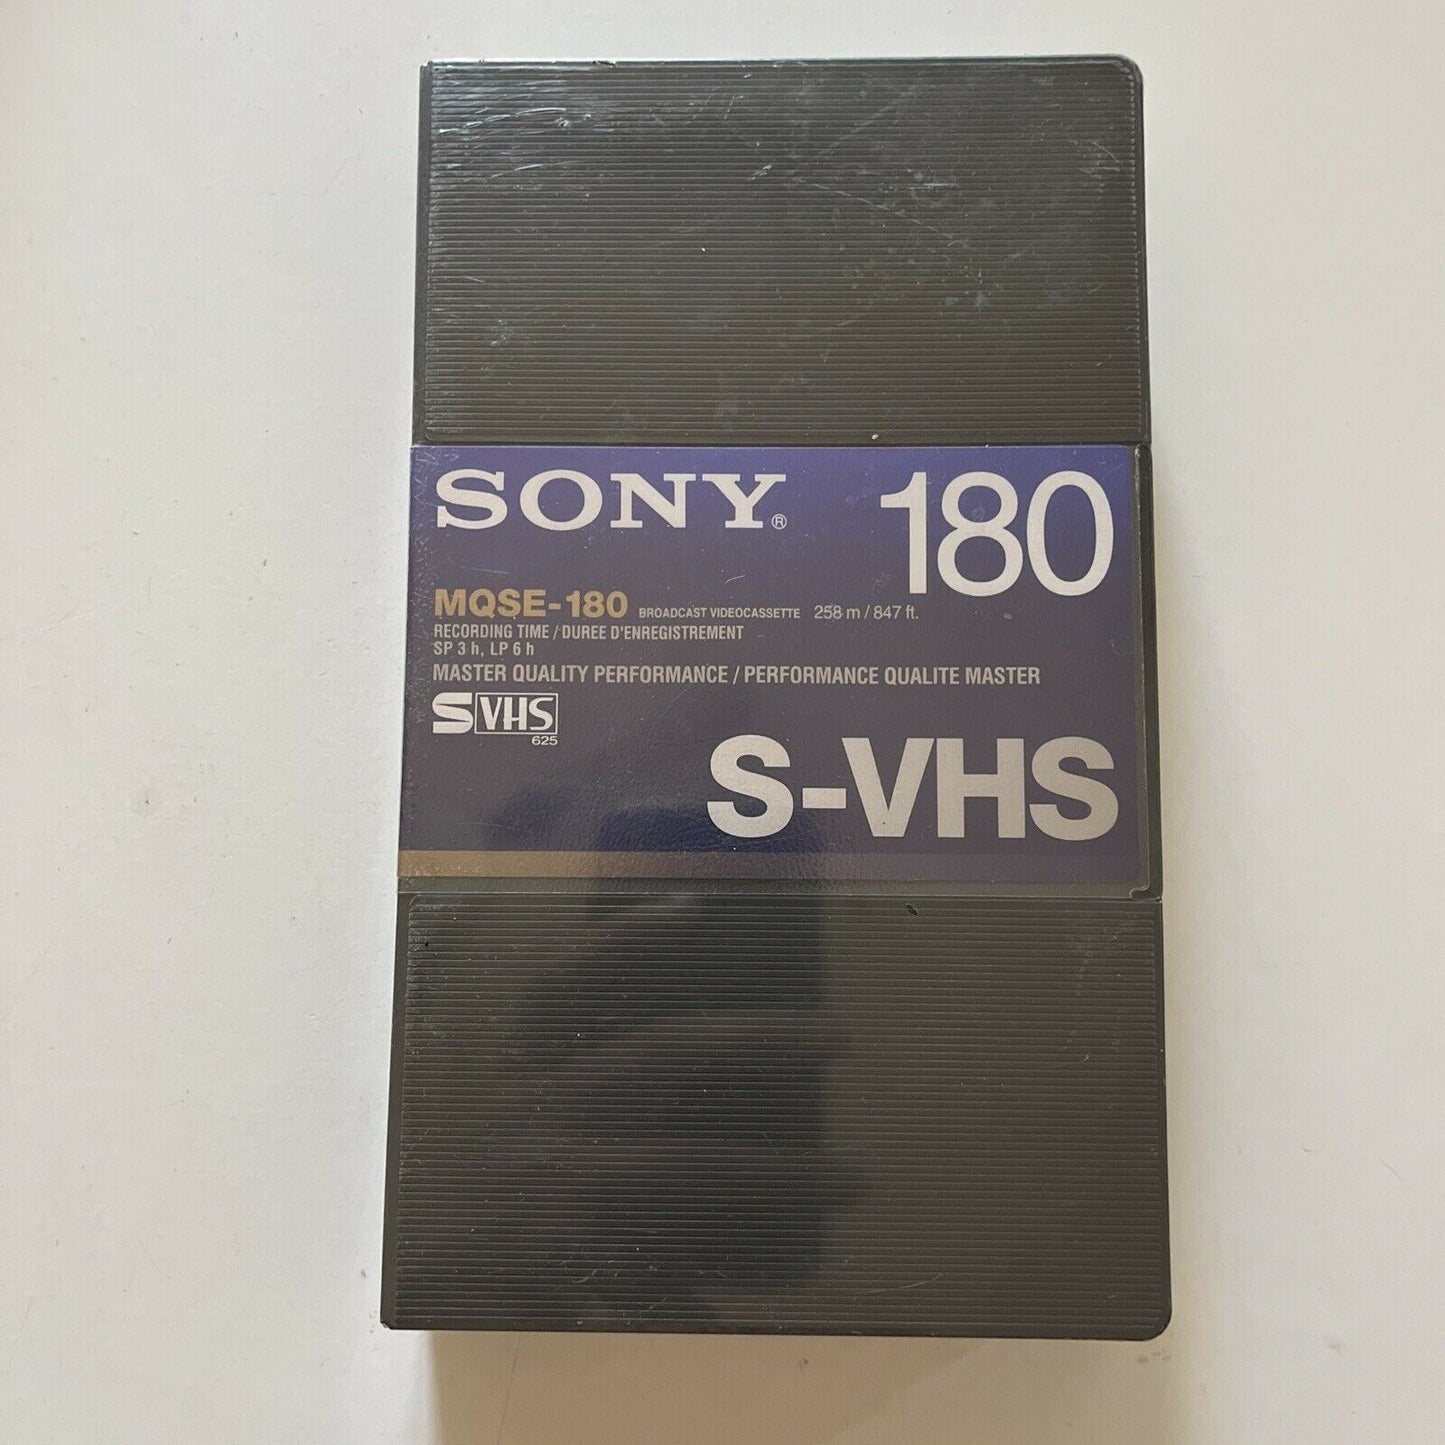 *New Sealed* Sony MQSE-180 S-VHS Broadcast Videocassette